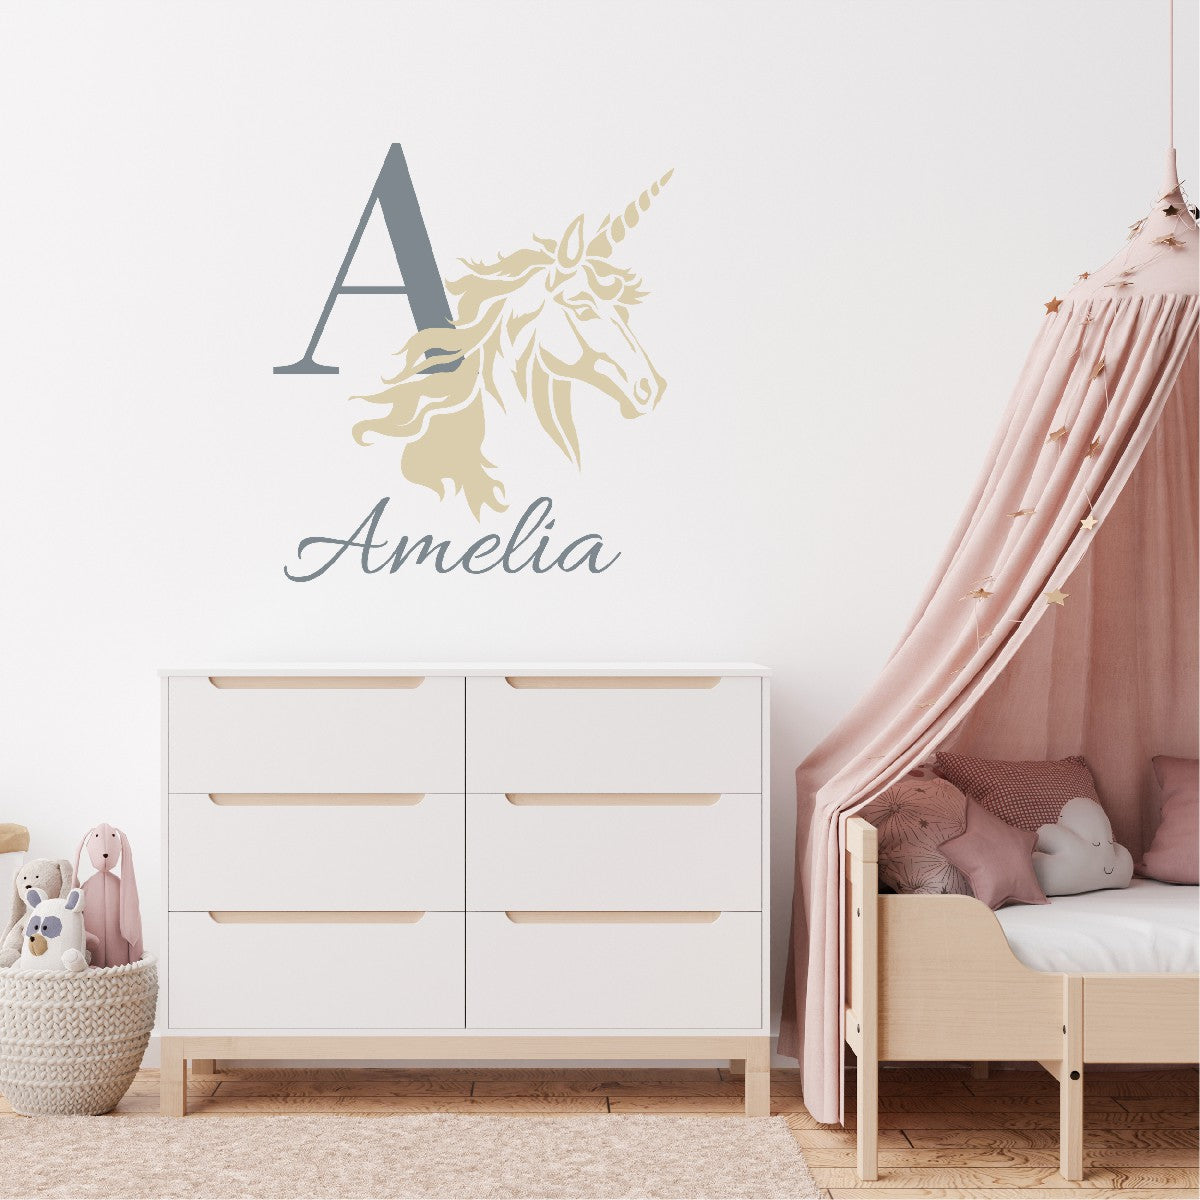 Custom Unicorn Monogram Wall Decals - Personalized Vinyl Stickers Featuring Kid's Name - Transform and Enchant Any Room with Whimsical Unicorn Wall Designs